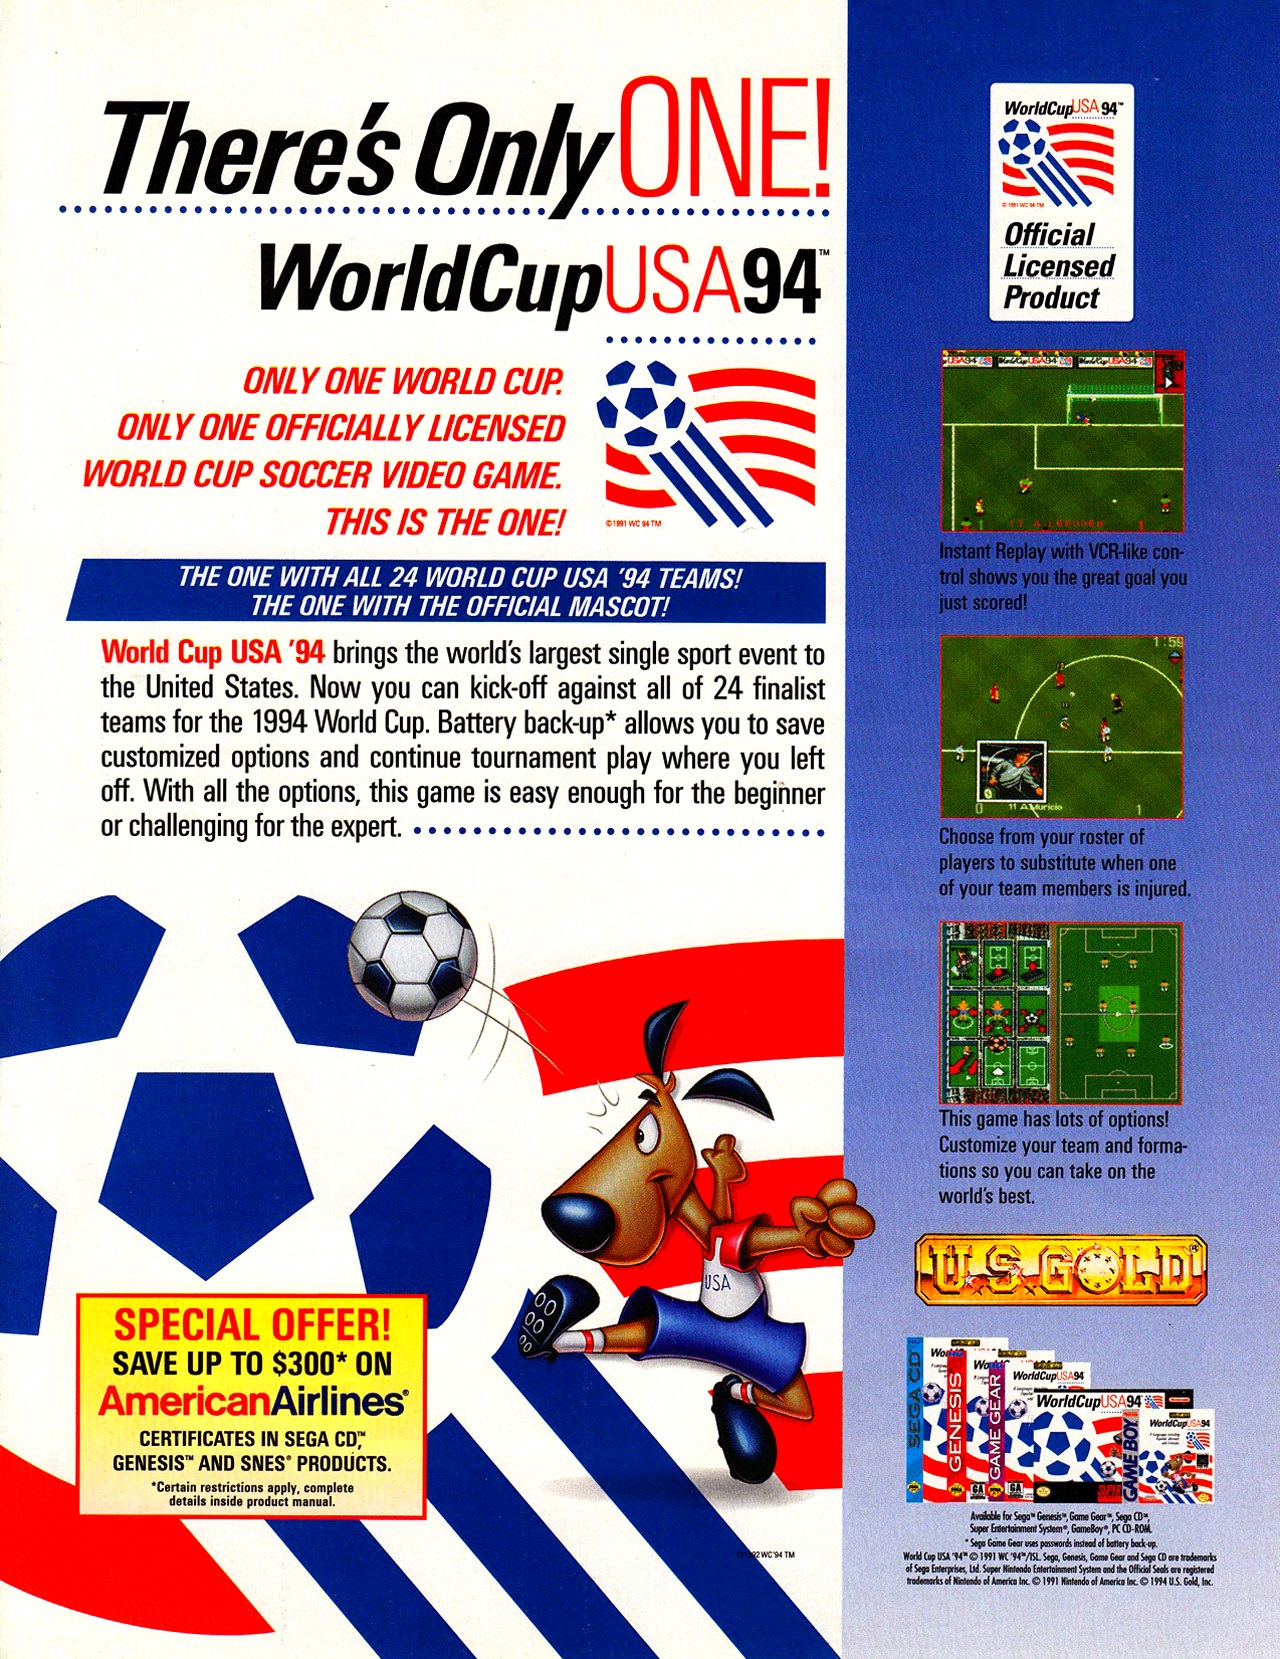 World Cup USA 94 Images - LaunchBox Games Database